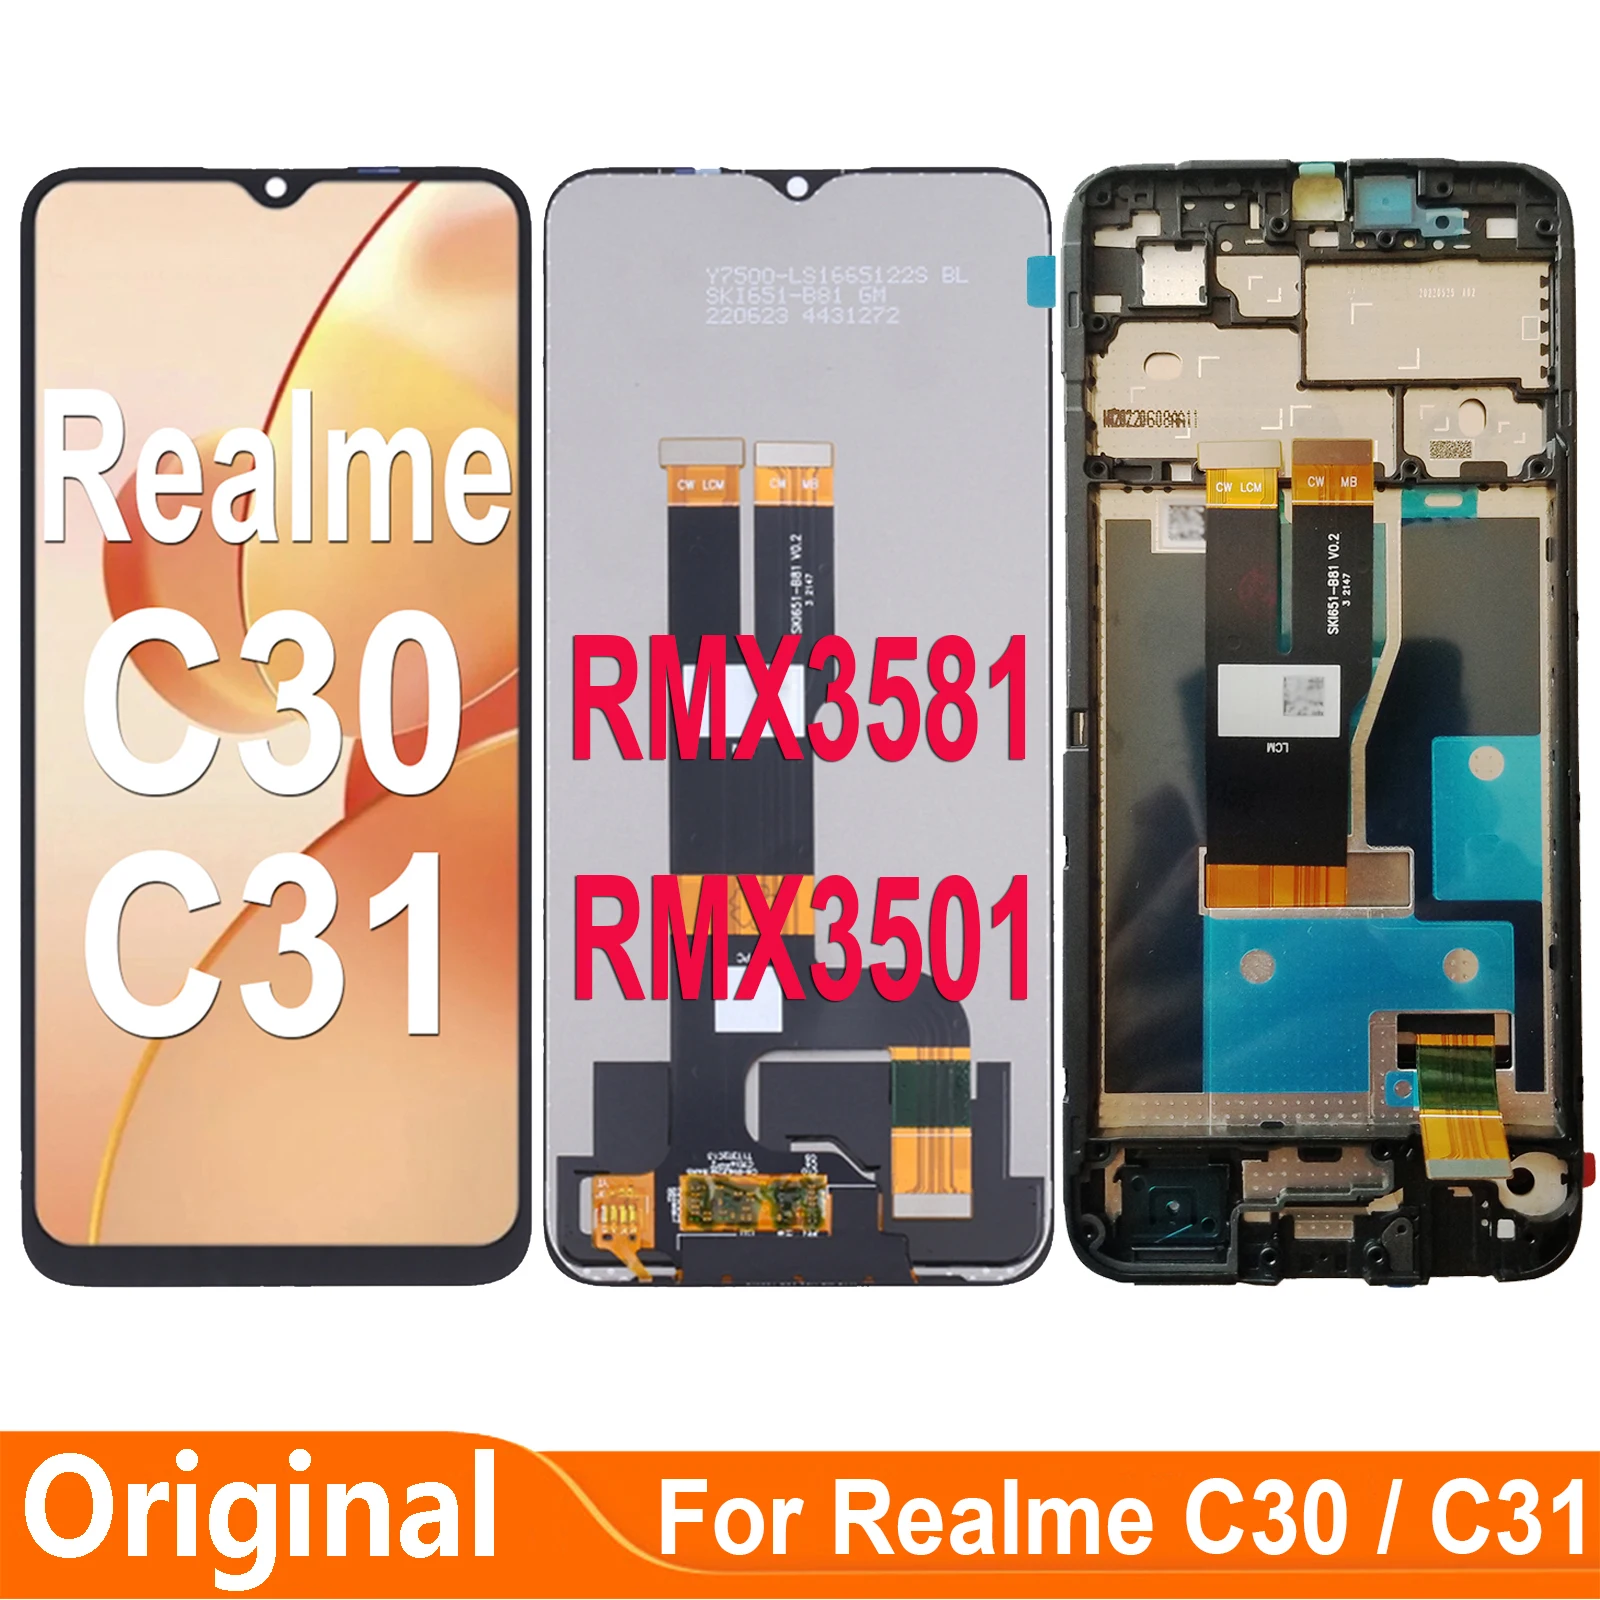 

Original 6.5" For Realme C31 RMX3501 C30 RMX3581 LCD Dispaly Touch Digitizer Screen Assembly Parts